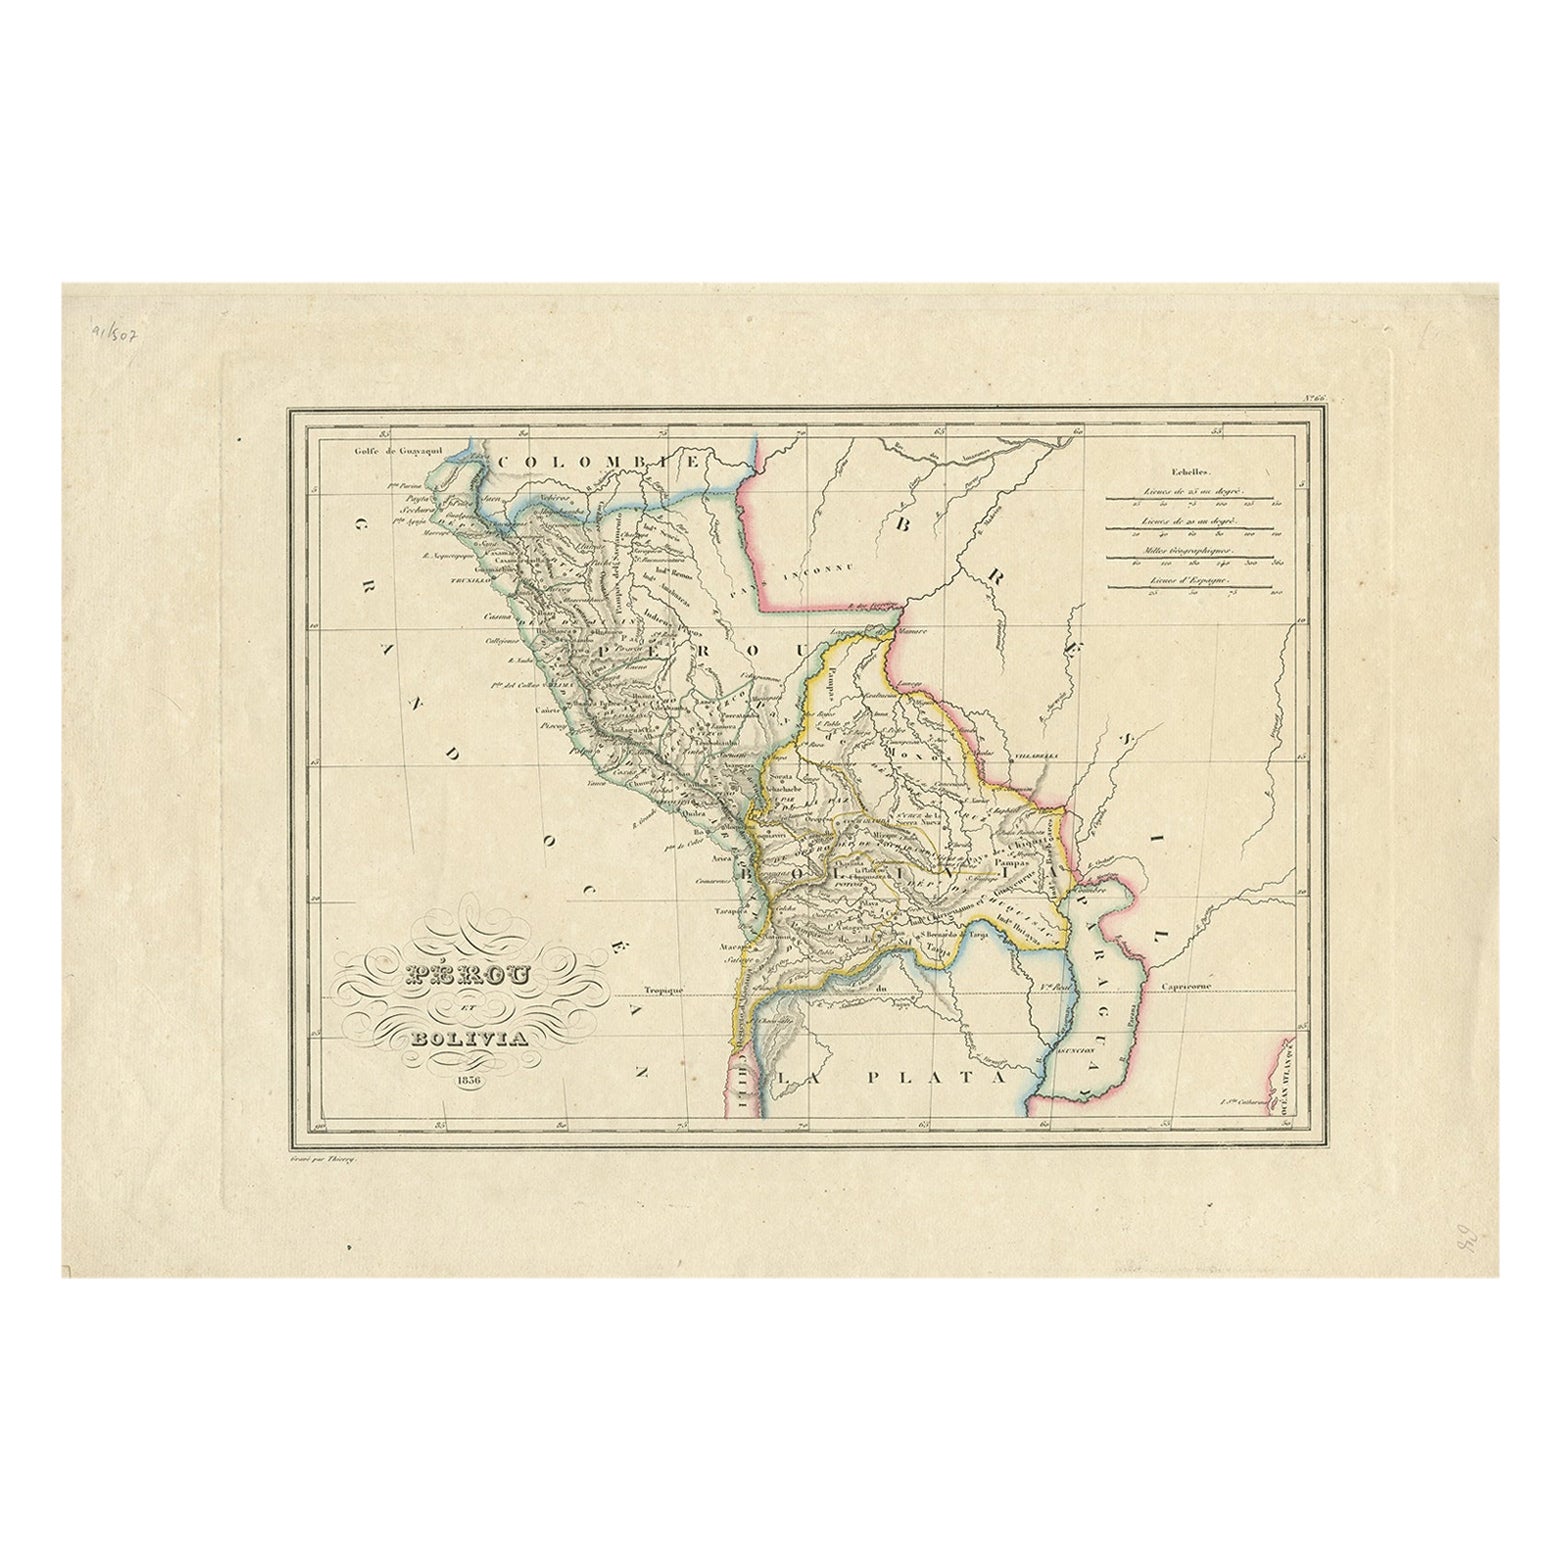 Antique Map of Peru and Bolivia by Thierry, 1836